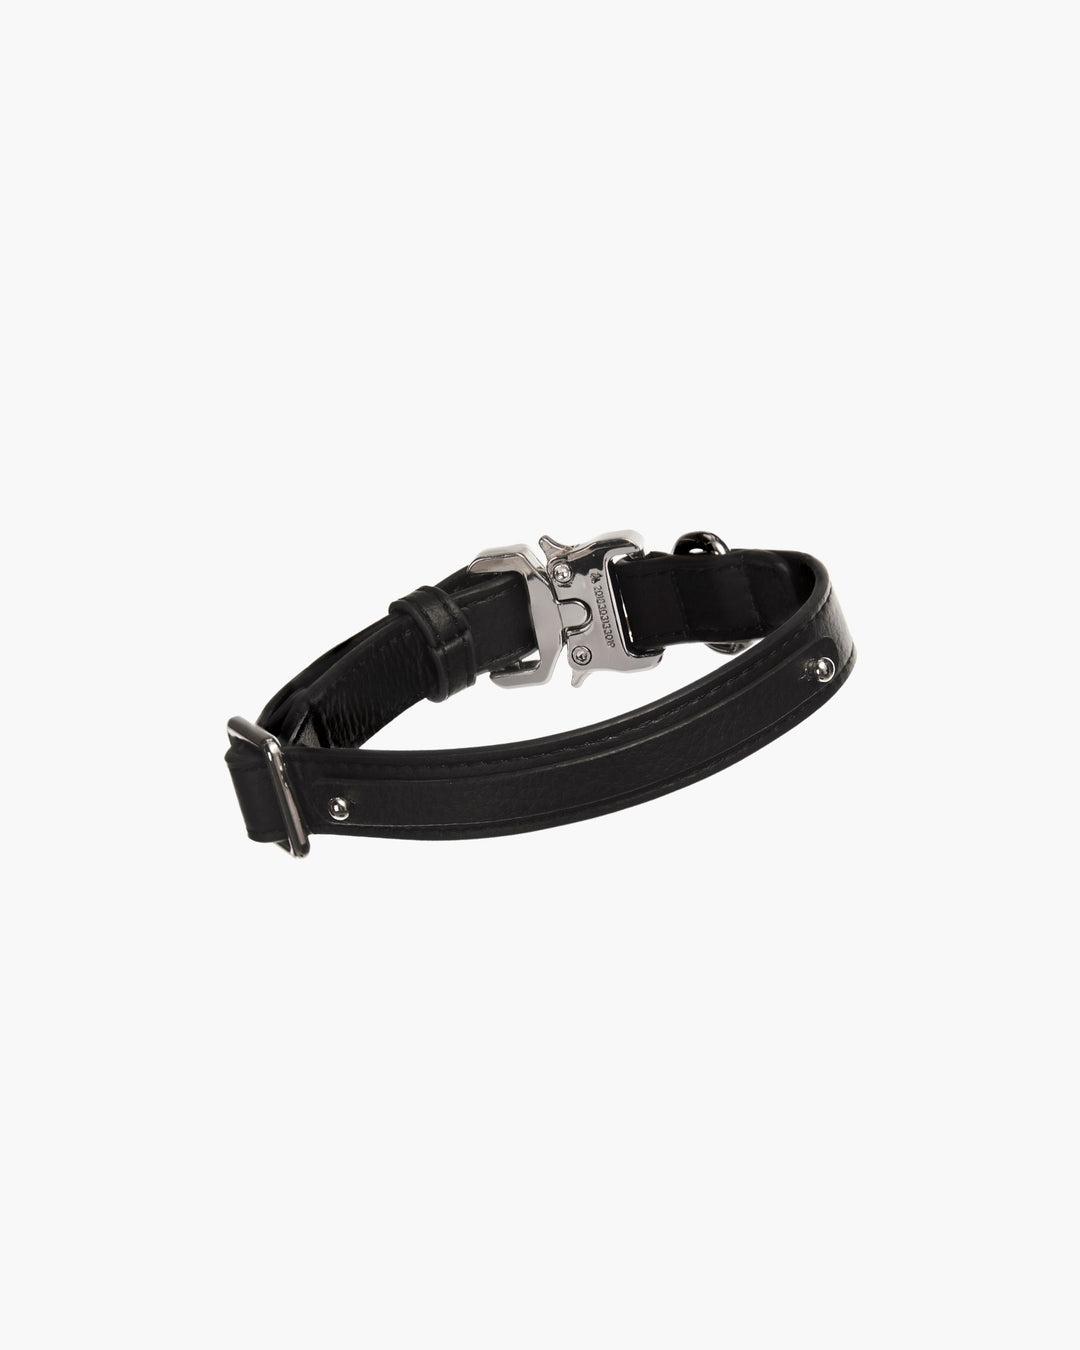 STRAY-ED Signature Dog Collar without letters- Black